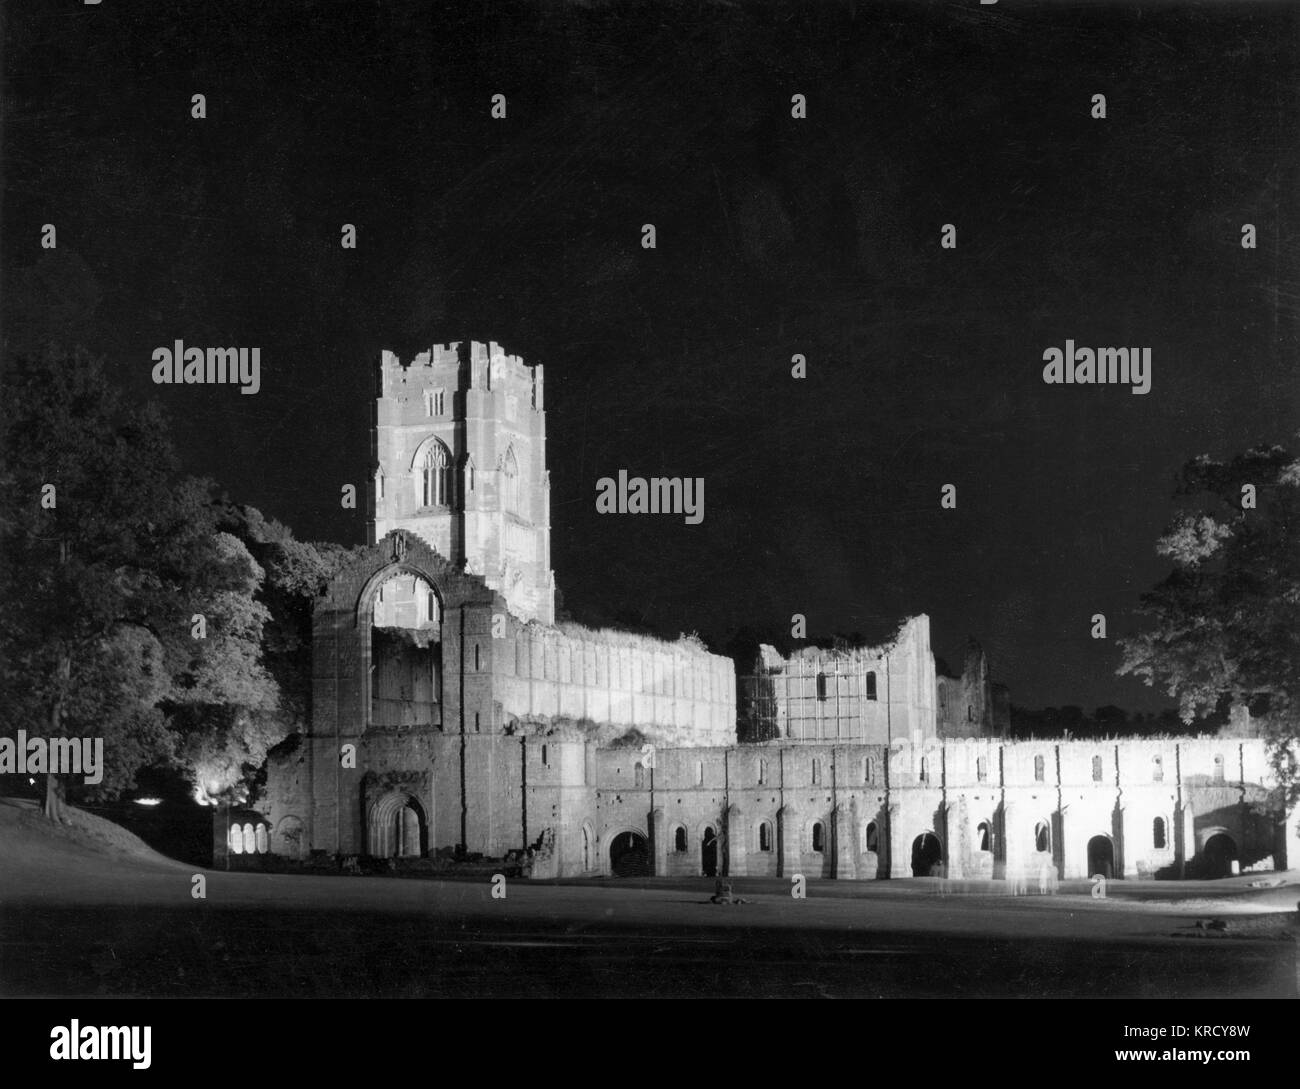 Fountains Abbey, Yorkshire,  England, a Cistercian abbey  which was founded in 1132.  Here floodlit at night.       Date: 12th century Stock Photo